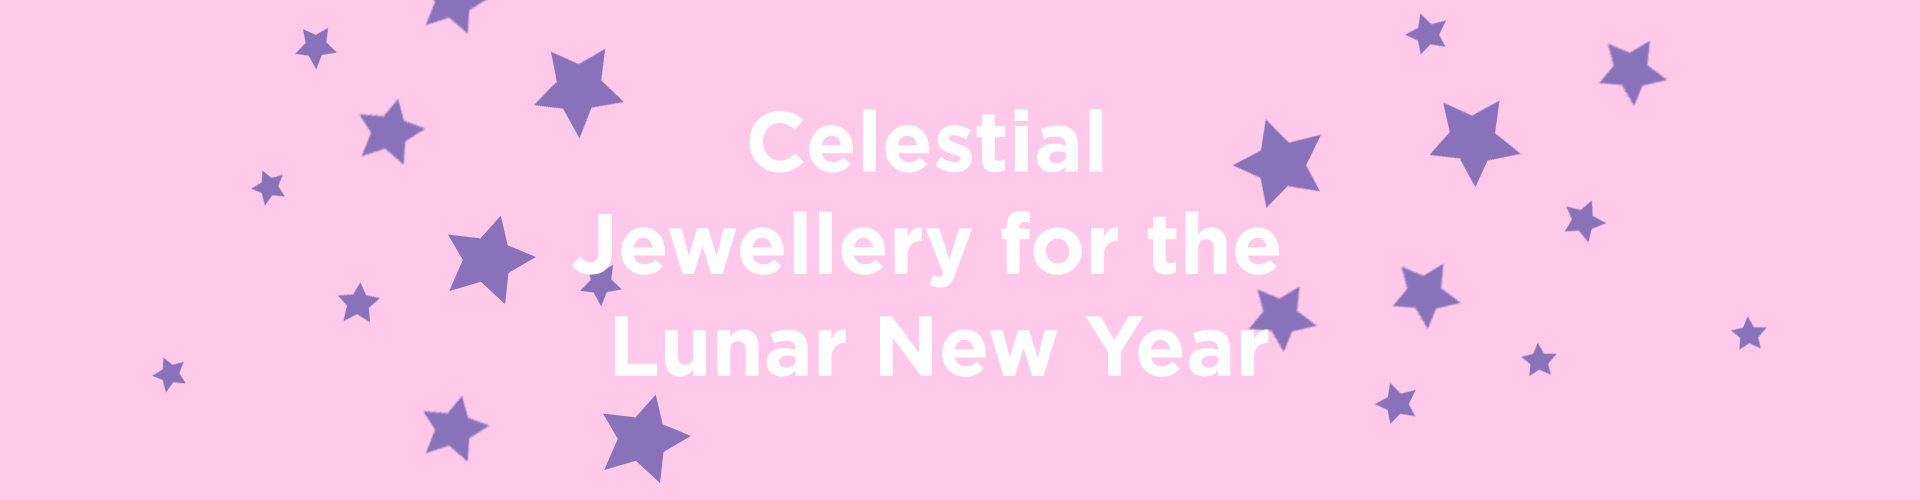 Celestial Jewellery for the Lunar New Year